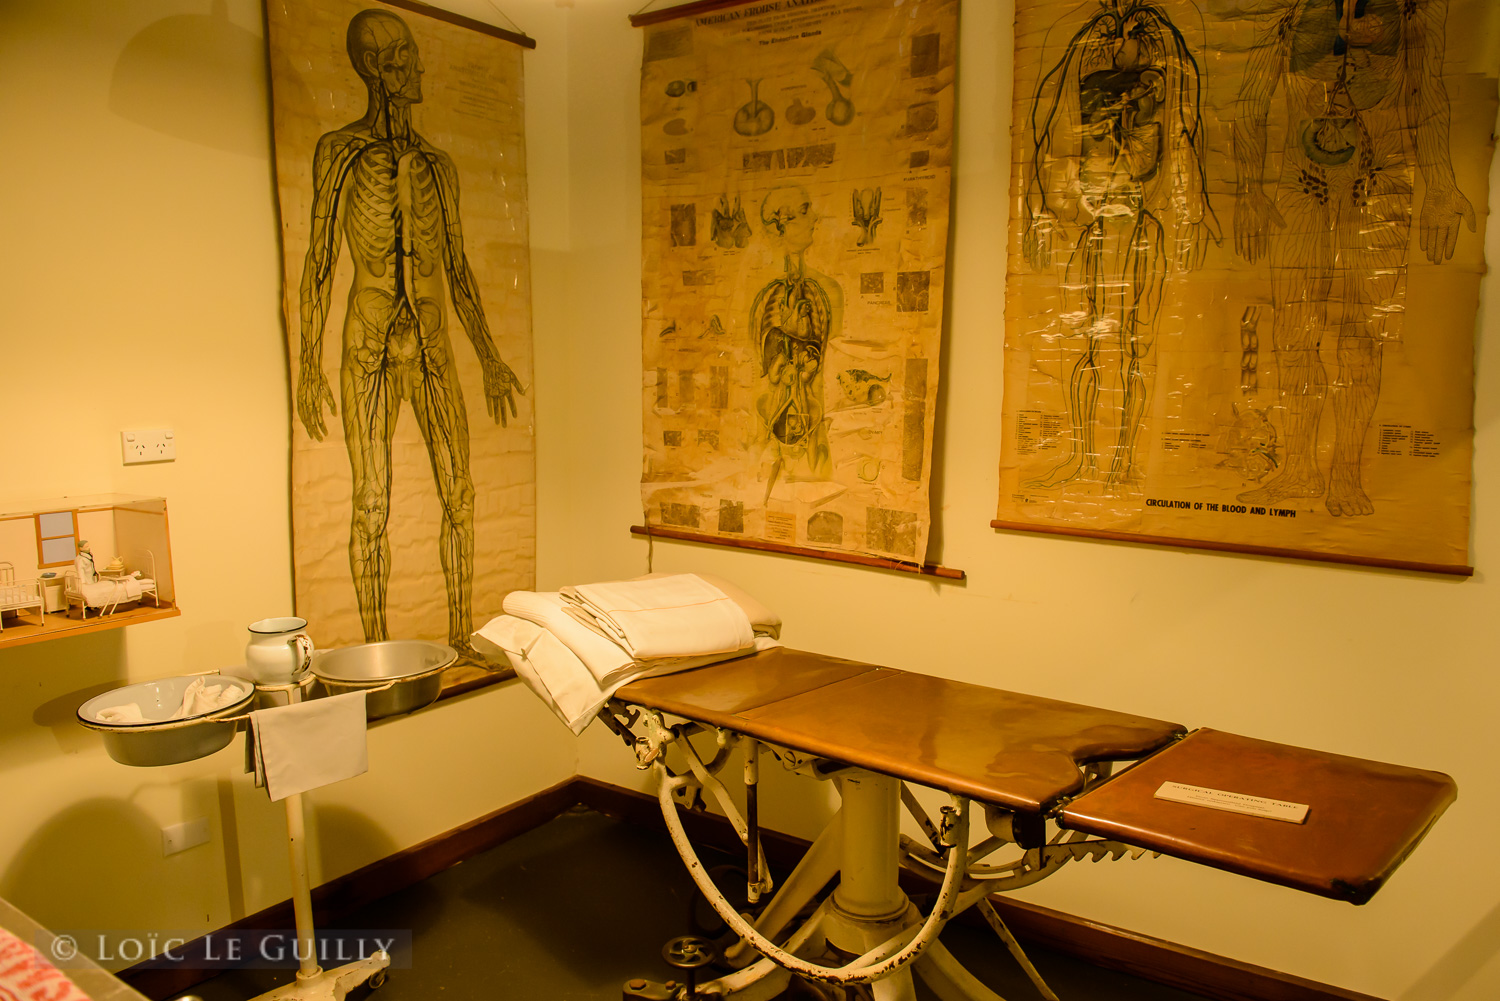 photograph of Old medical artefacts